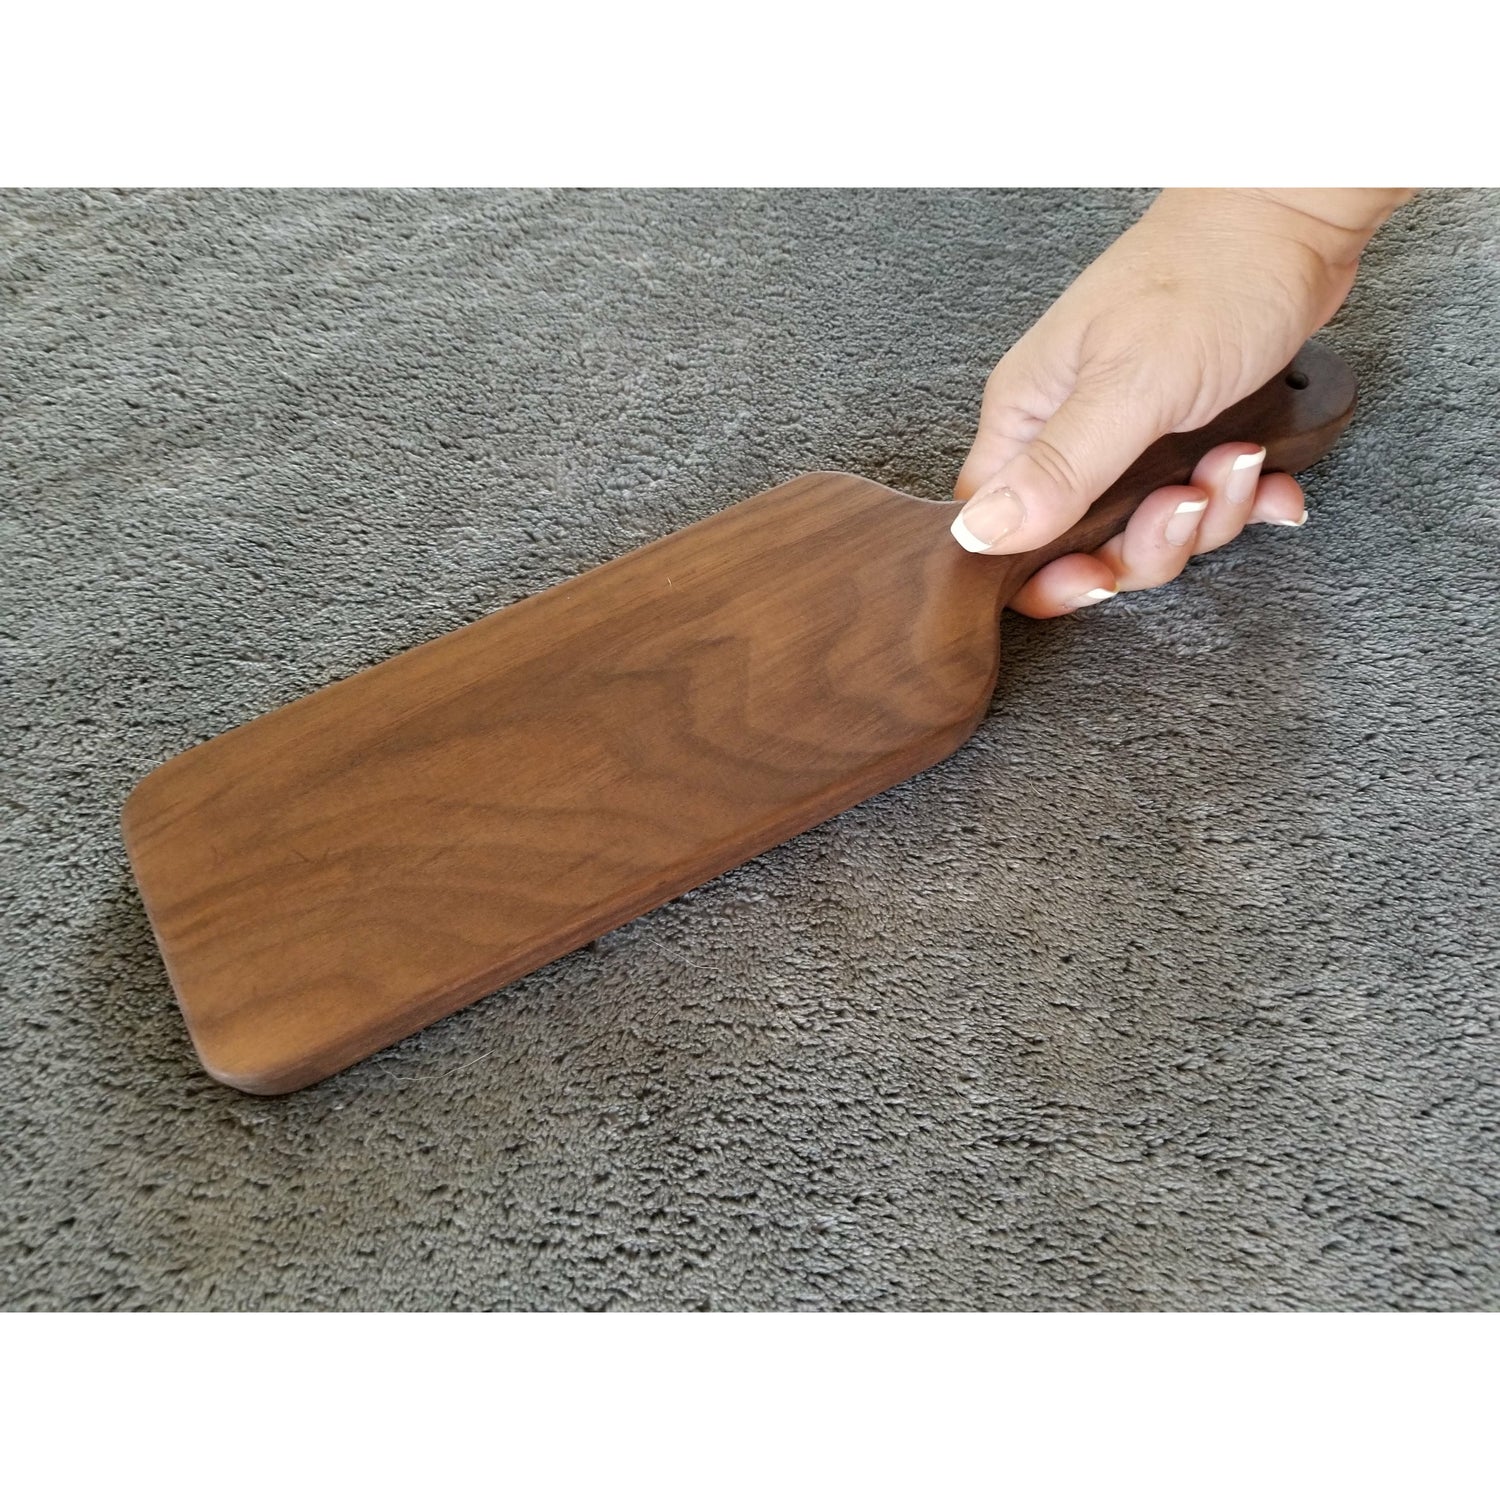 Spanking Paddle Solid no Holes, Wood Solid Spanking Paddle without